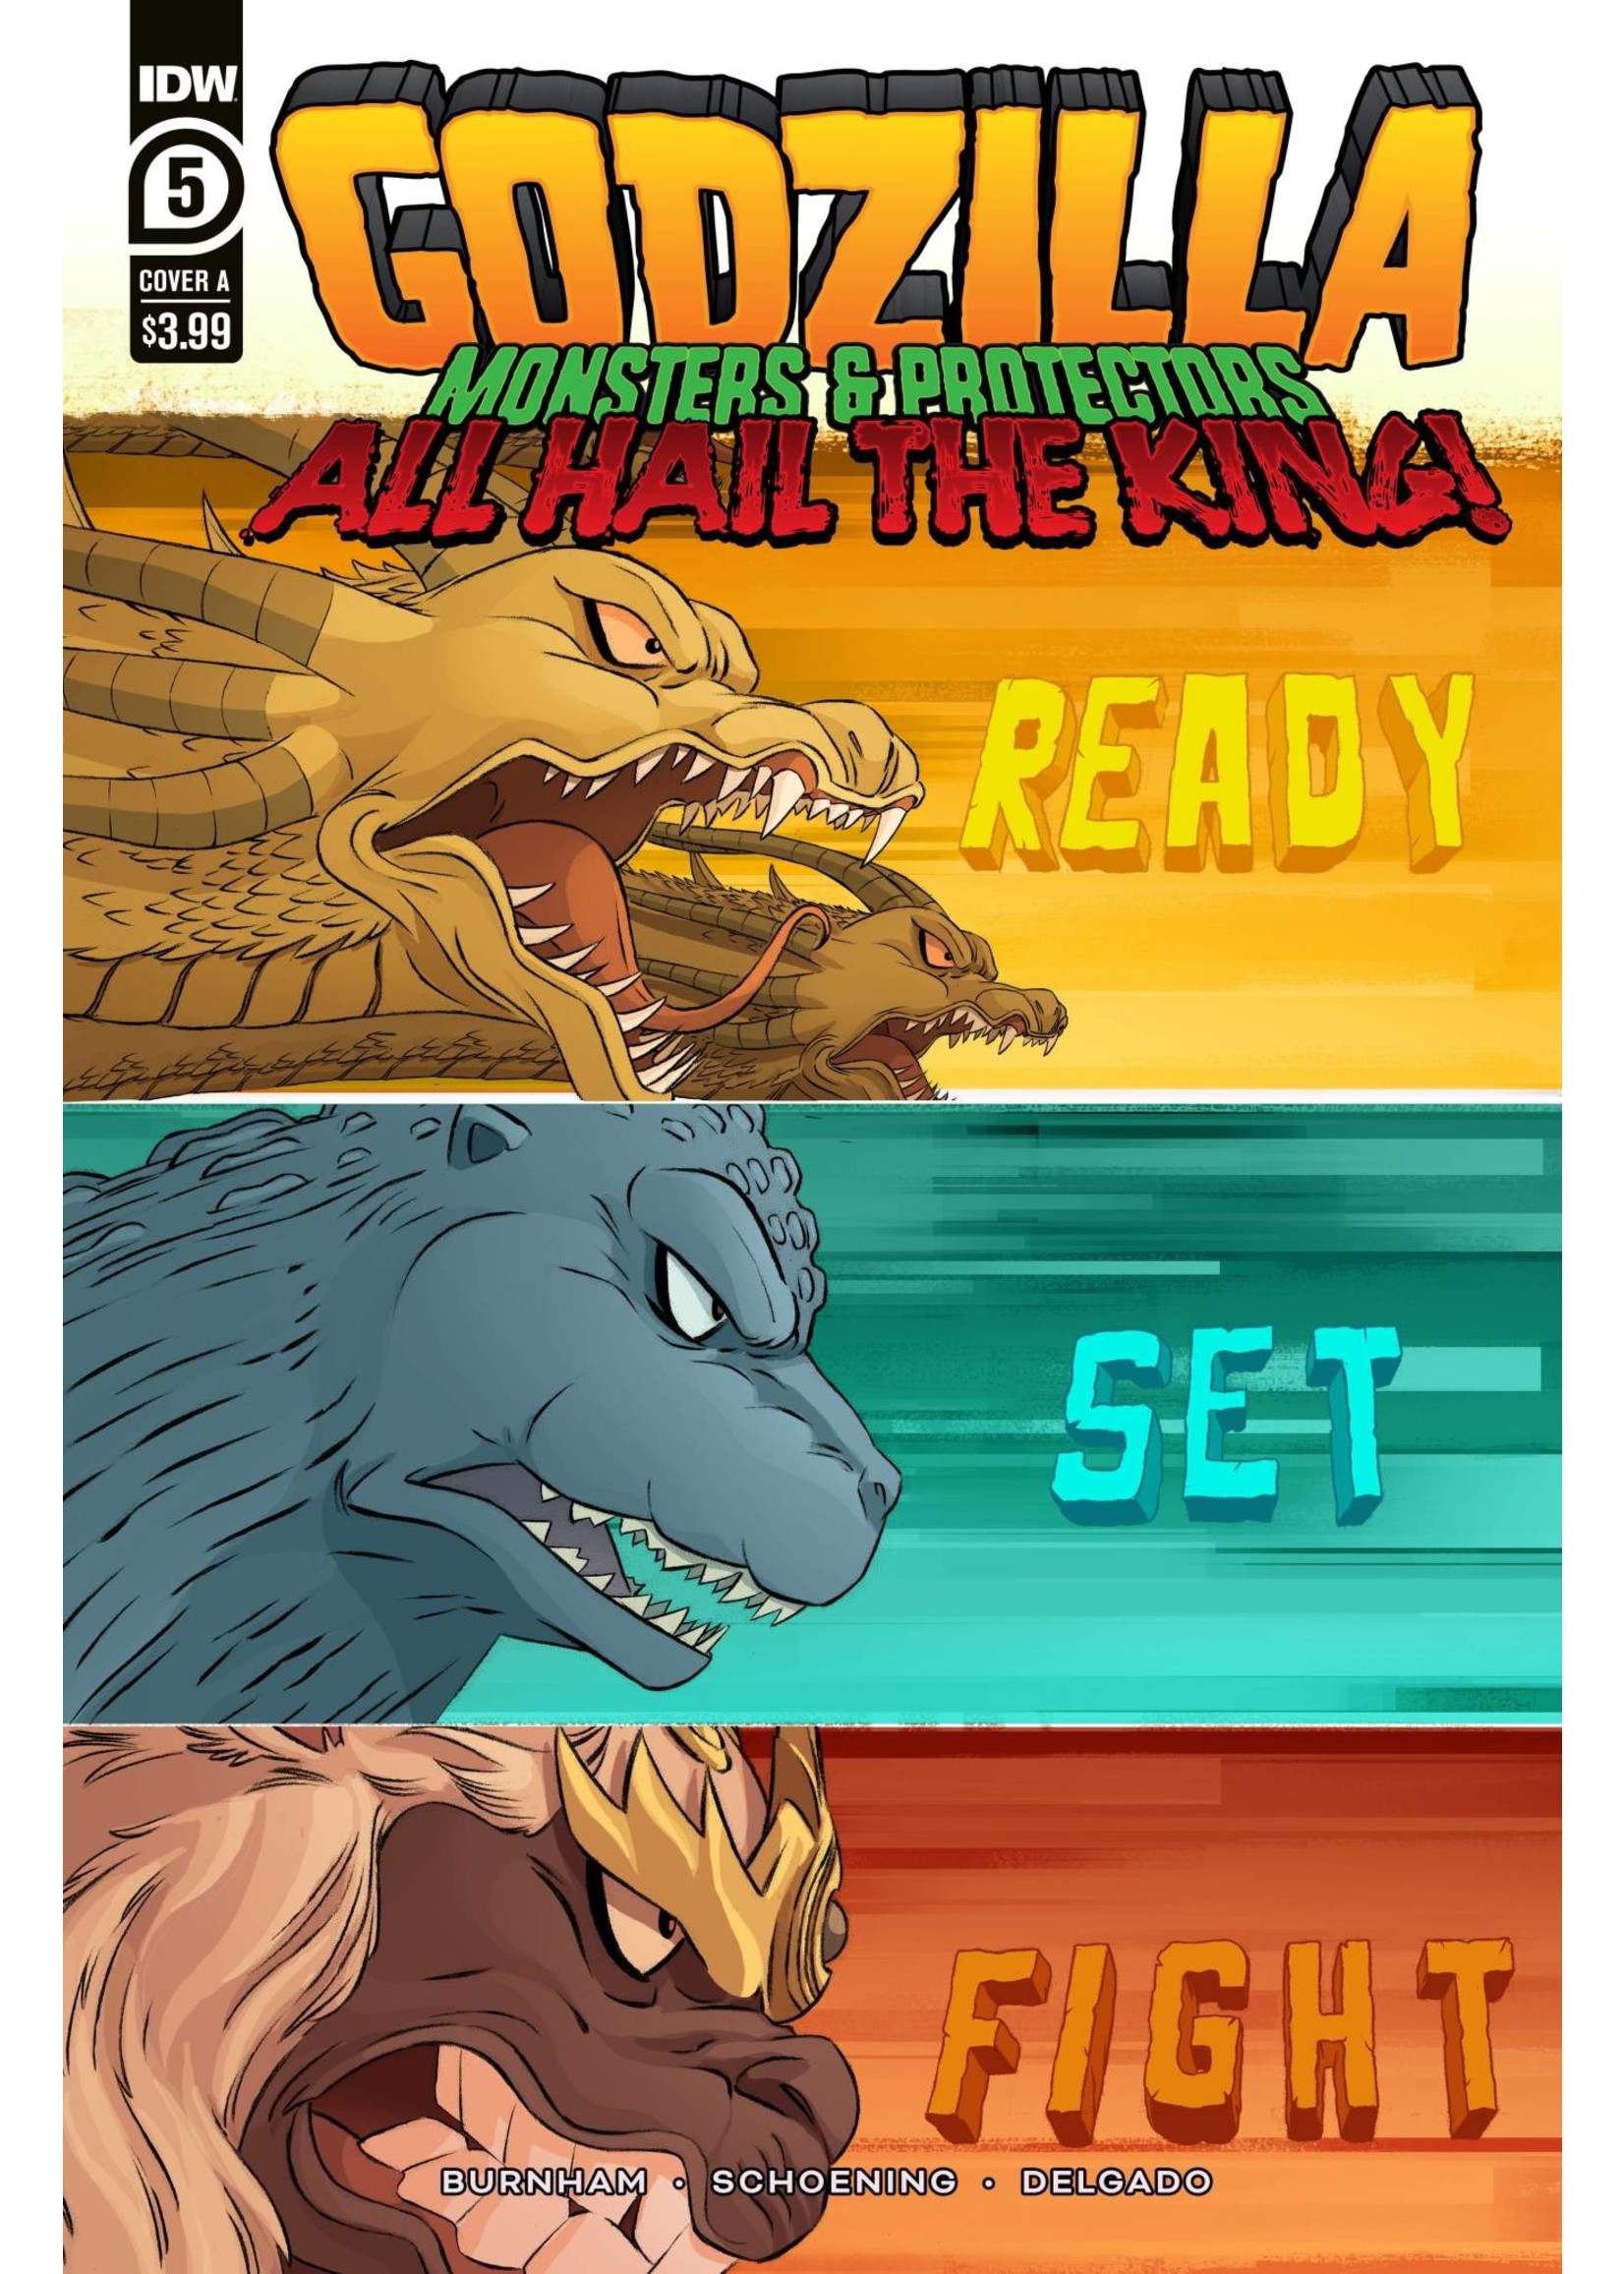 IDW PUBLISHING GODZILLA ALL HAIL THE KING complete 5 issue series